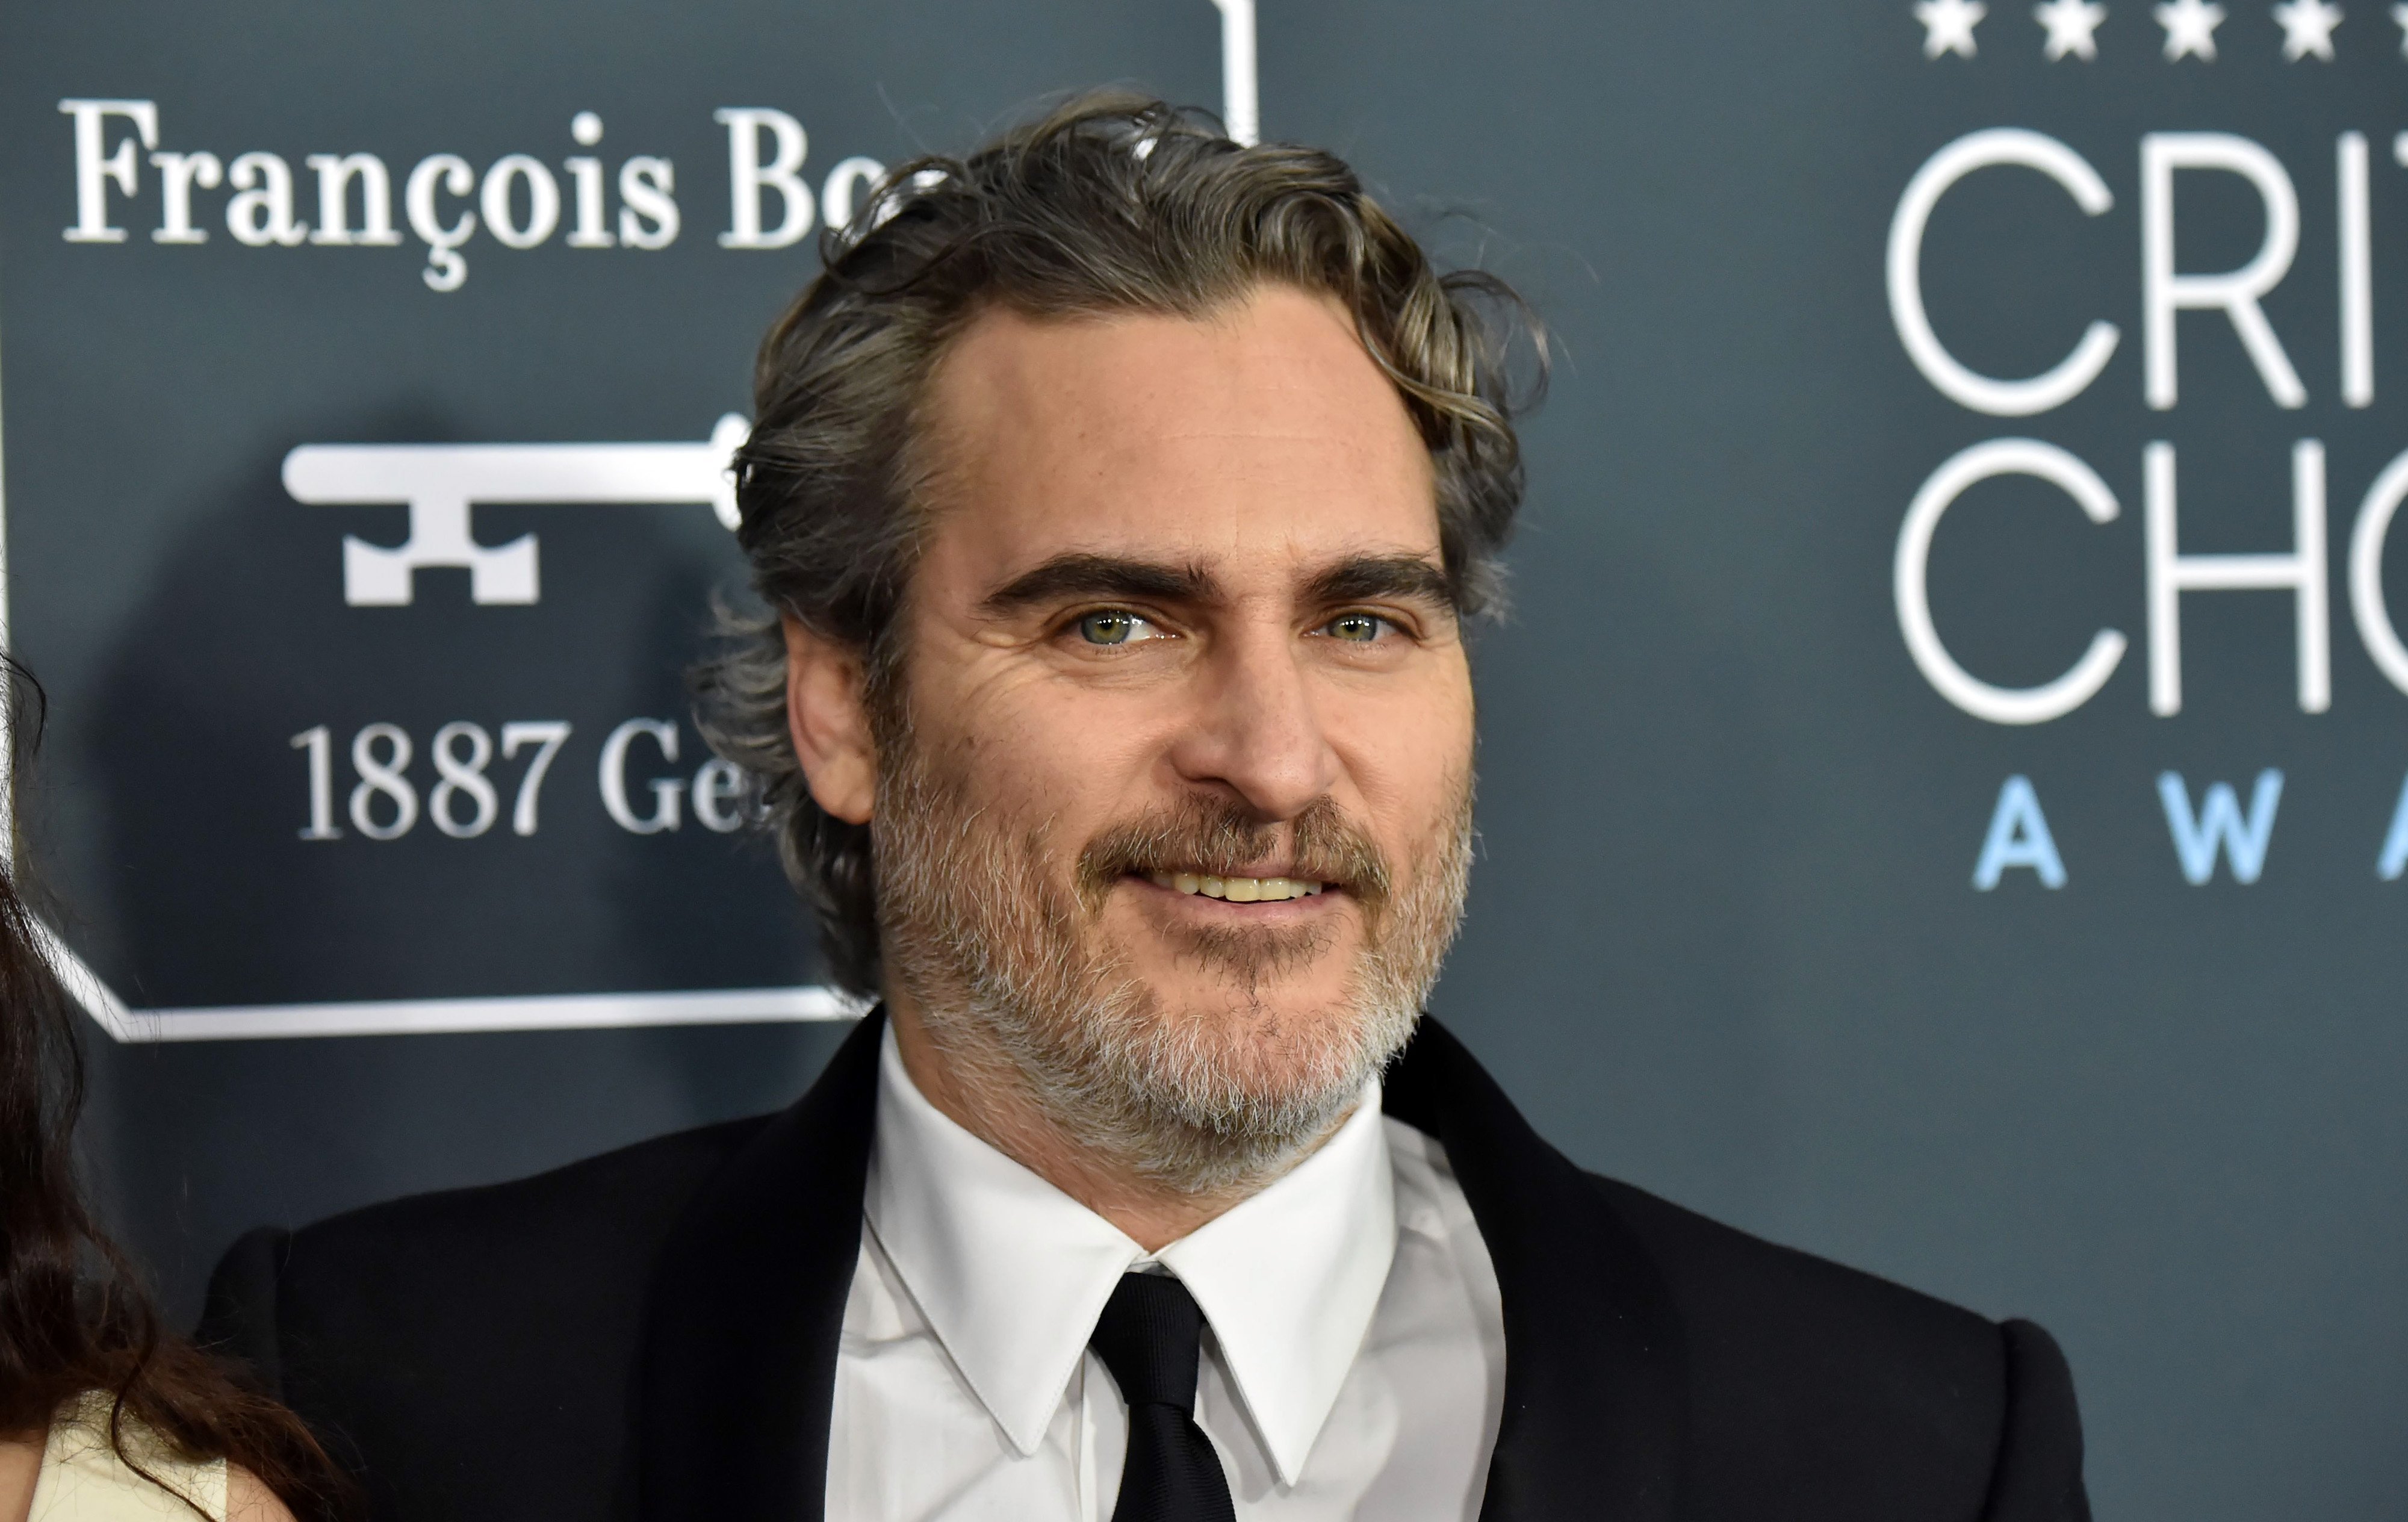 Joaquin Phoenix attends the 25th Annual Critics' Choice Awards at Barker Hangar on January 12, 2020 | Photo: GettyImages